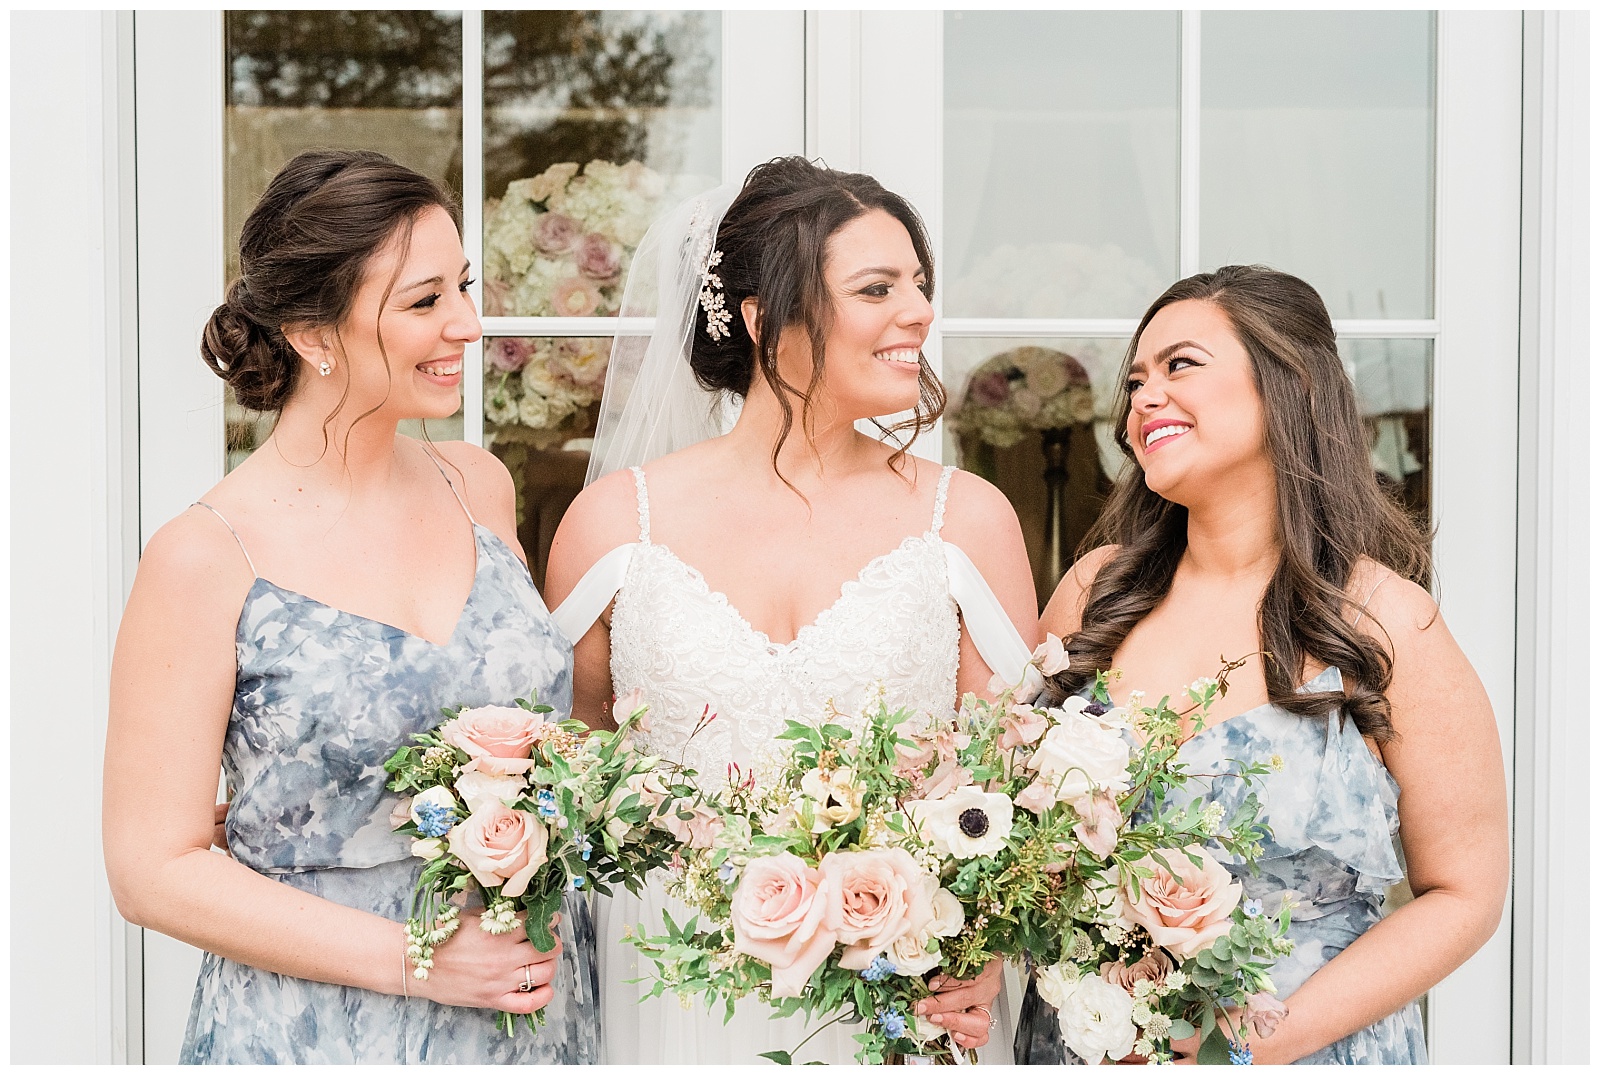 Bride and her maids of honor look at each other and smile.